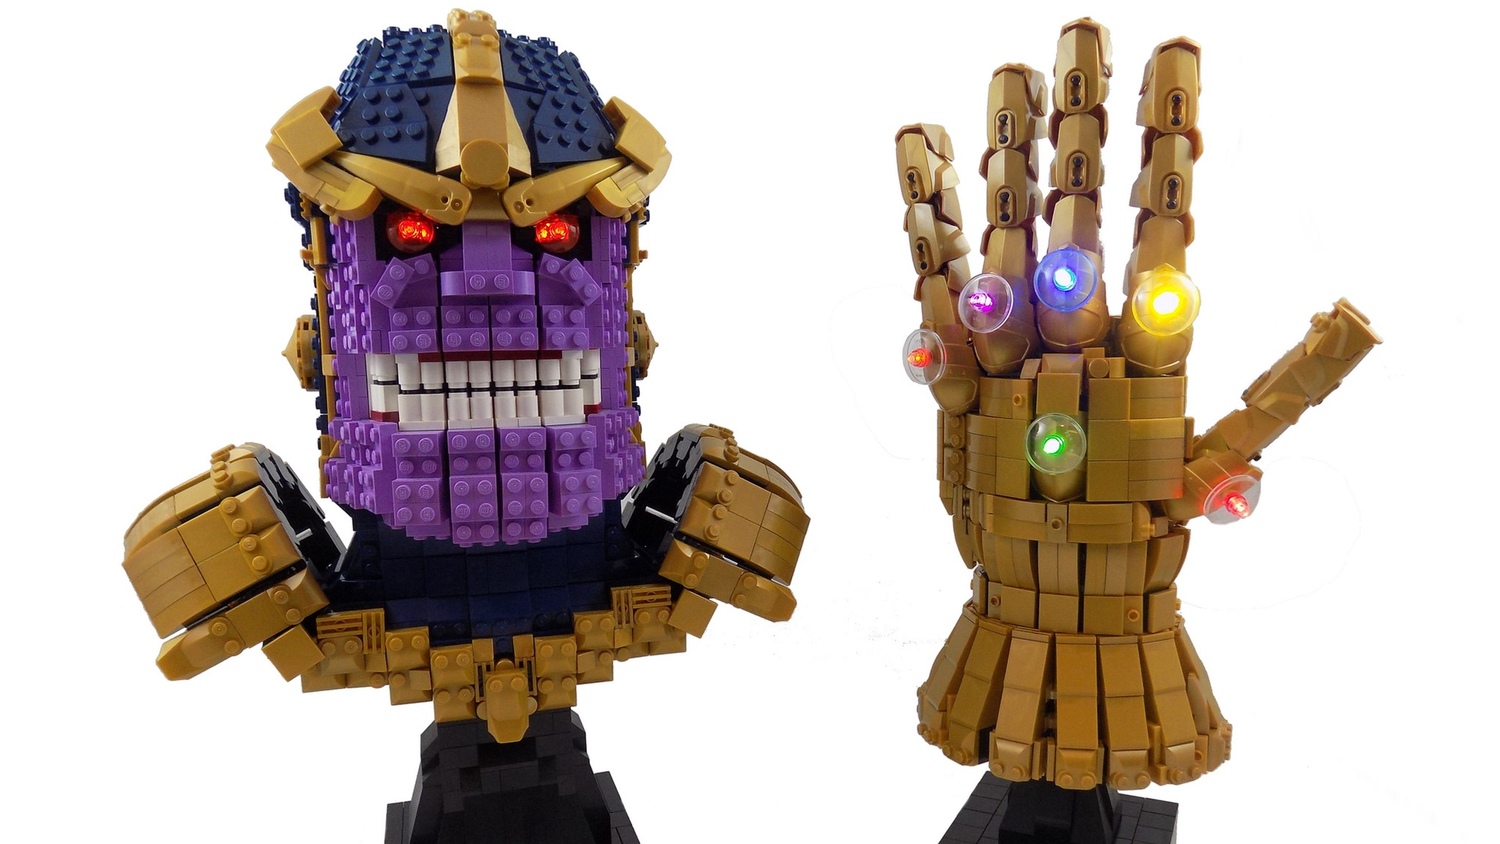 LEGO Thanos Wields The Power of The LEGO Infinity Gauntlet.